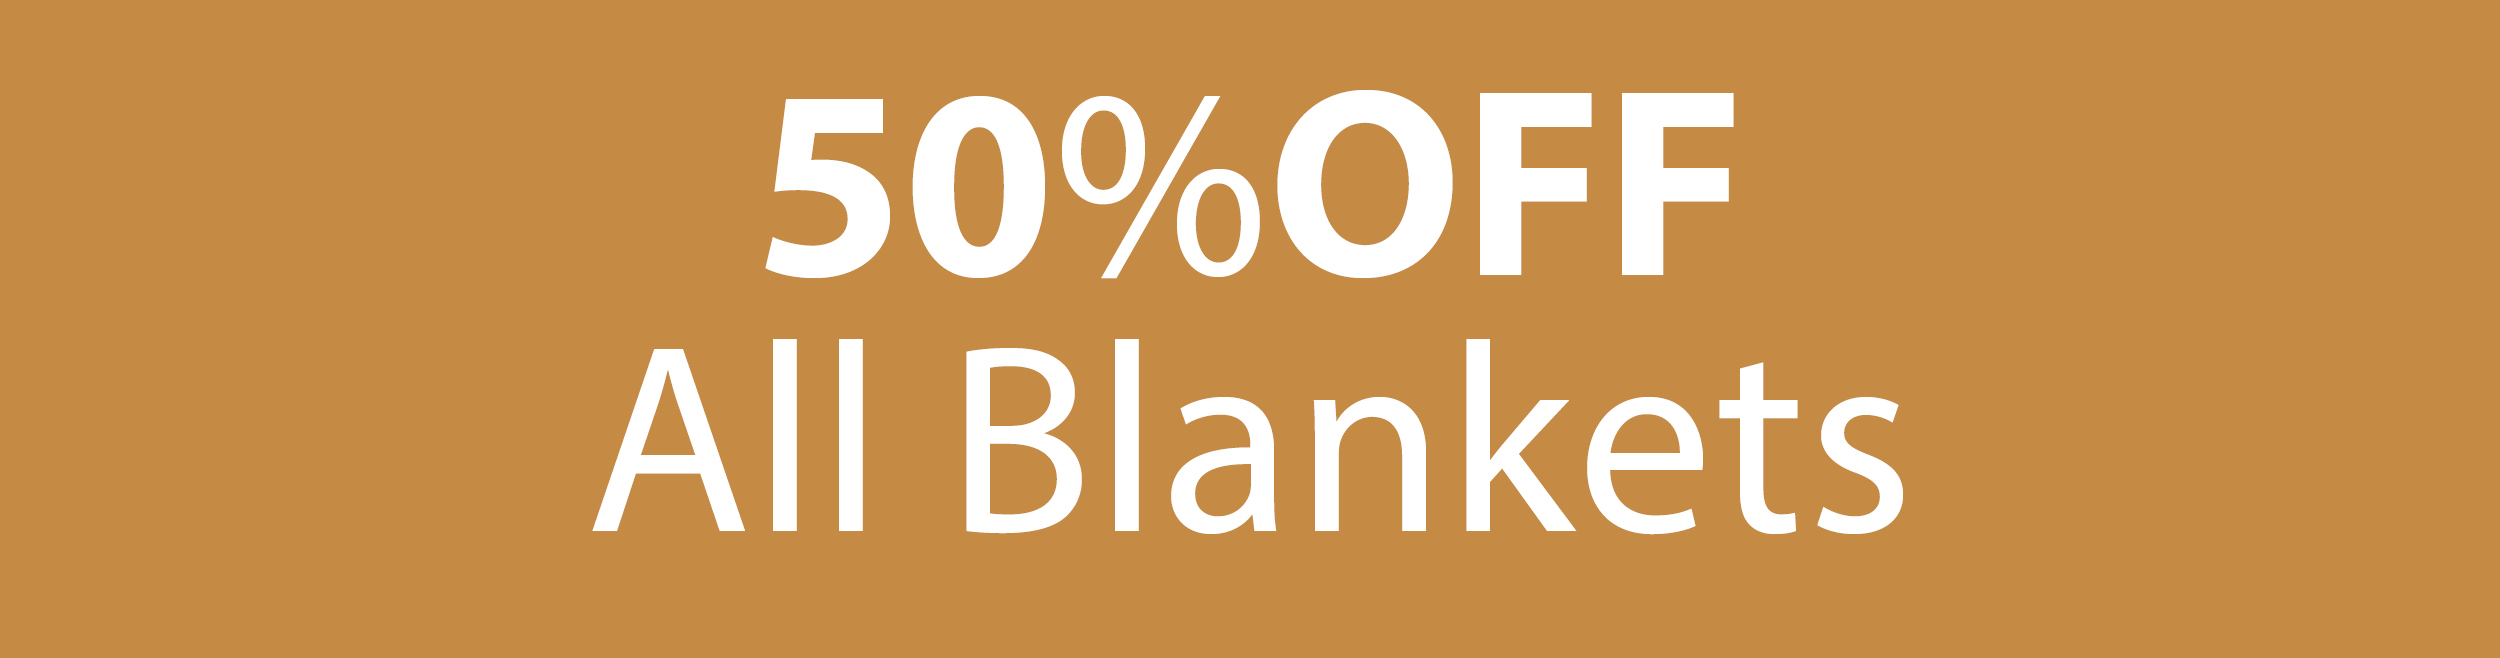 50% Off All Blankets